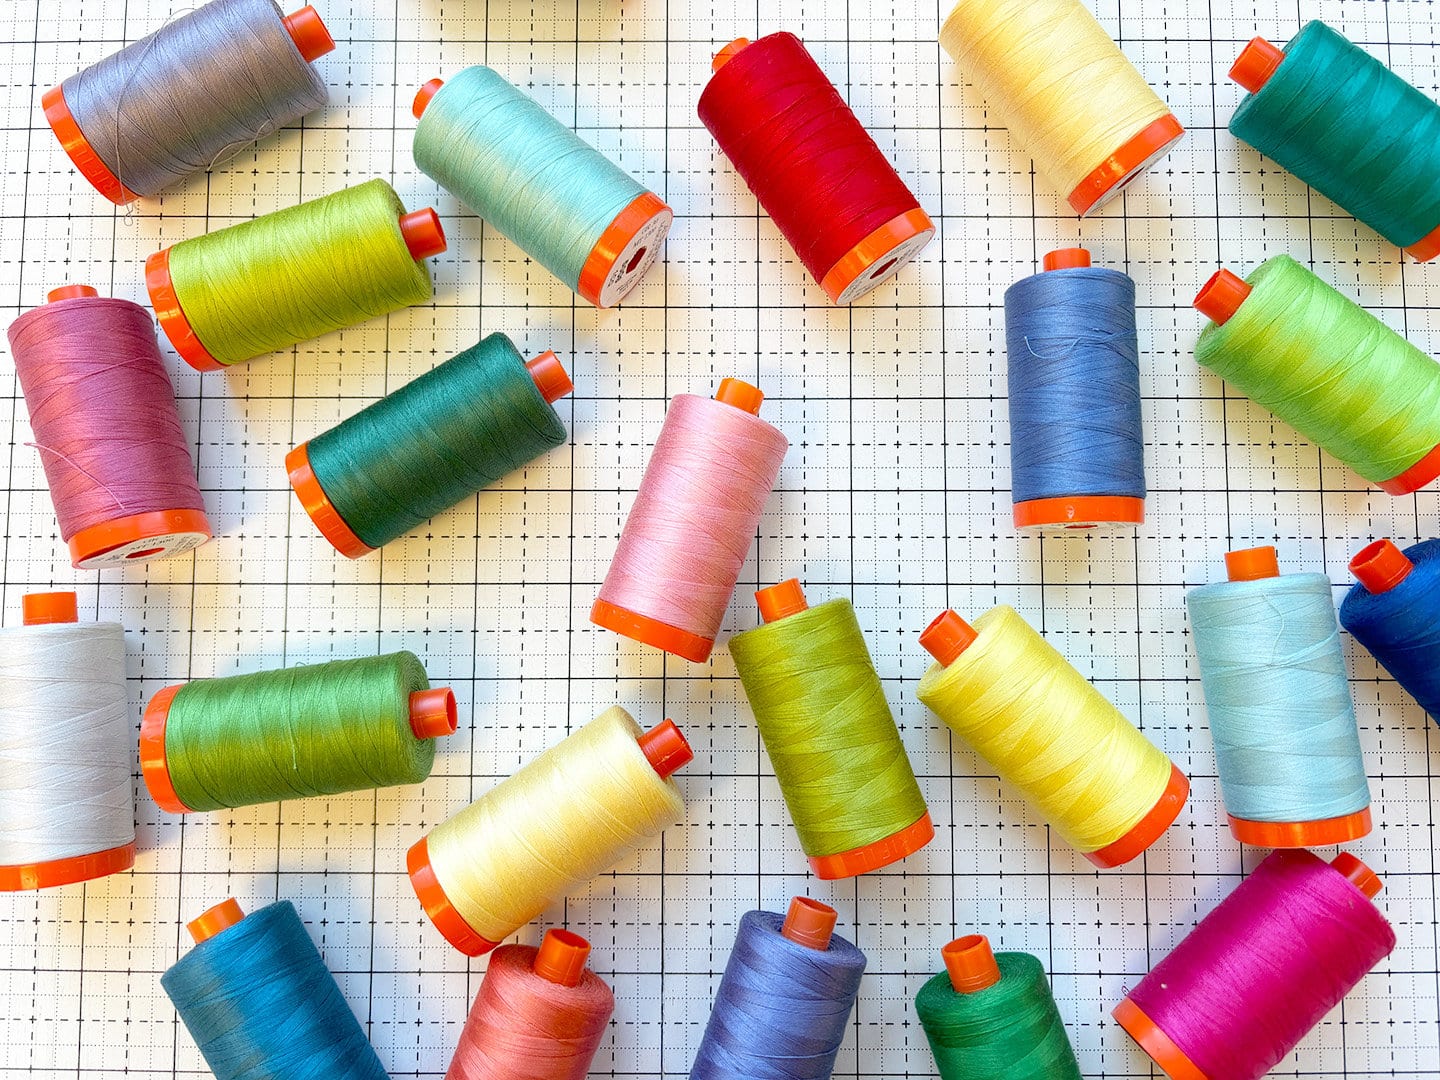 Organize Your Thread Spools & Bobbins with Sew Stacks! + Giveaway